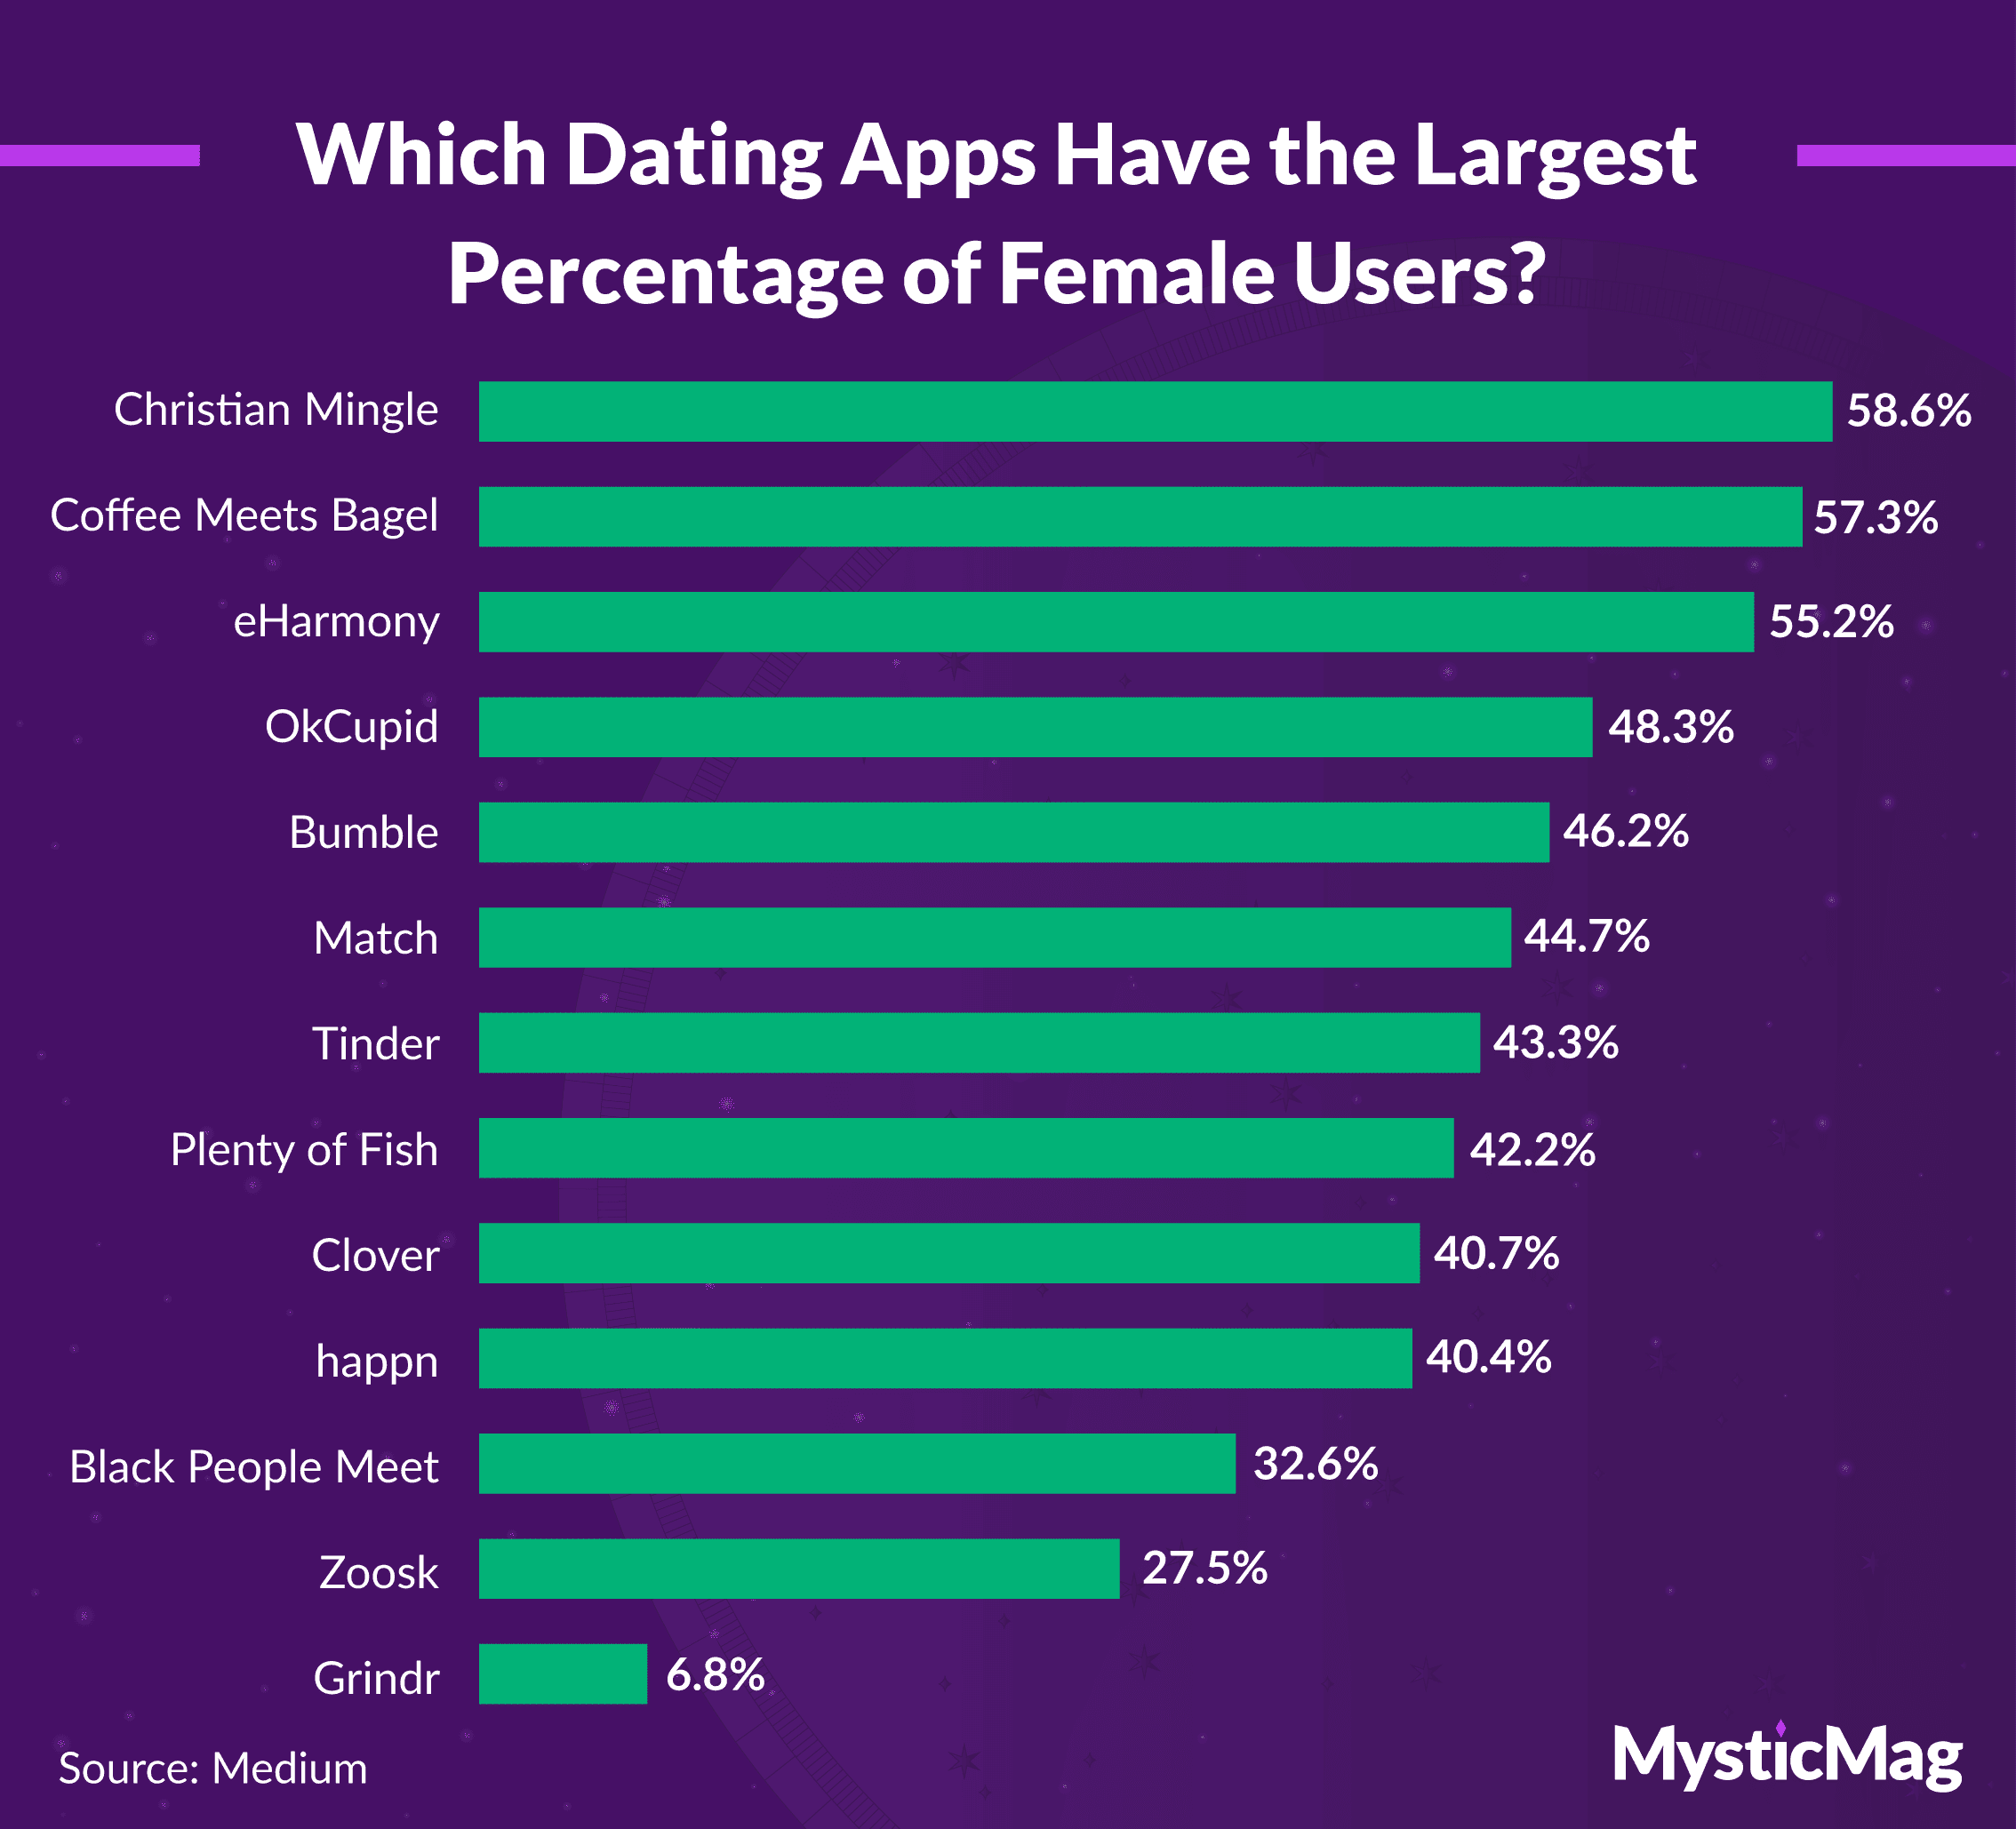 The dating apps with the largest percentage of female users